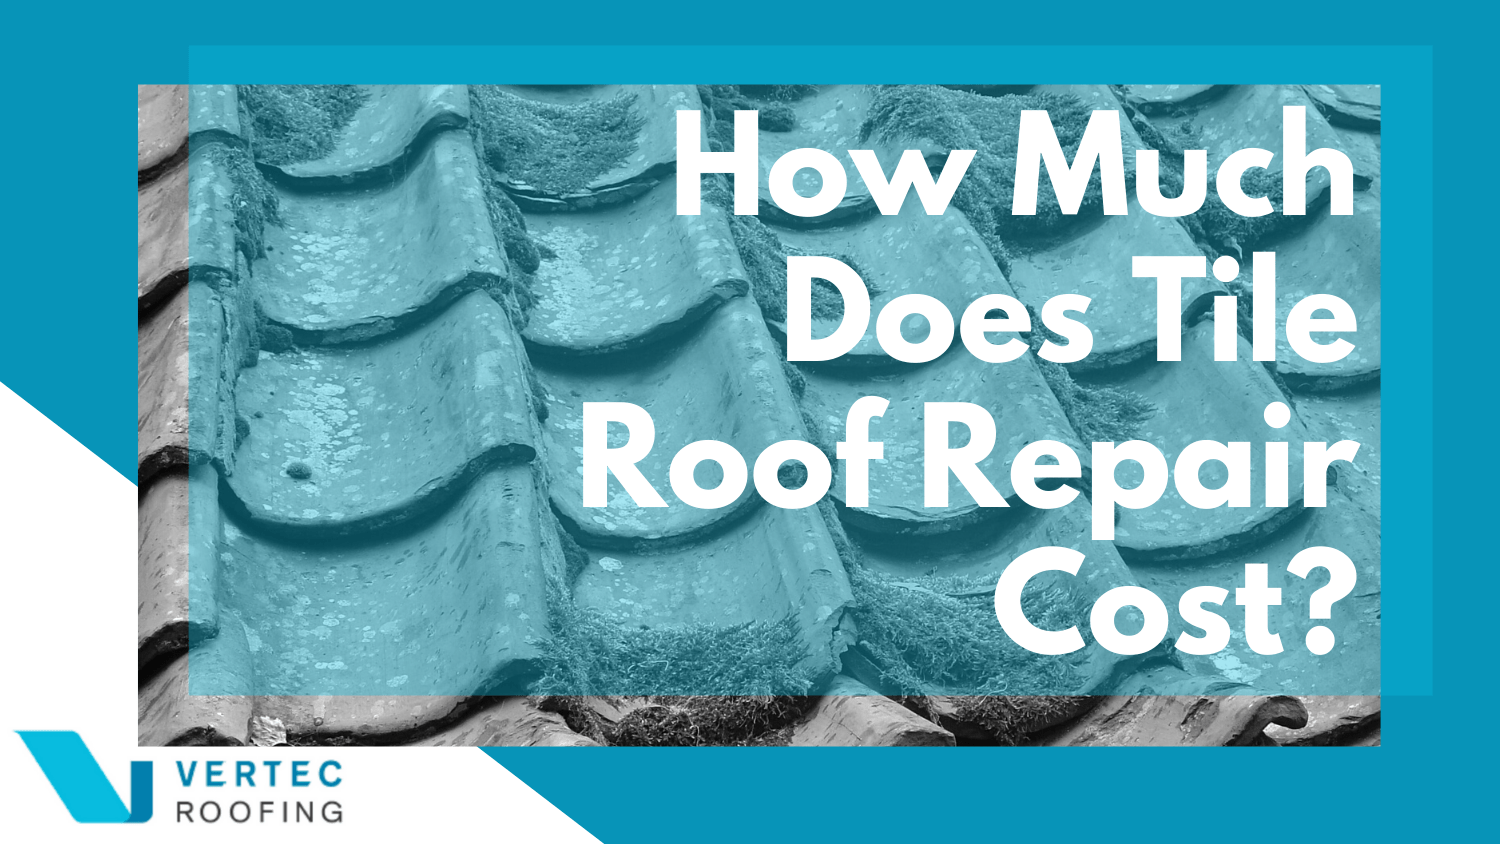 How Much Does Tile Roof Repair Cost?